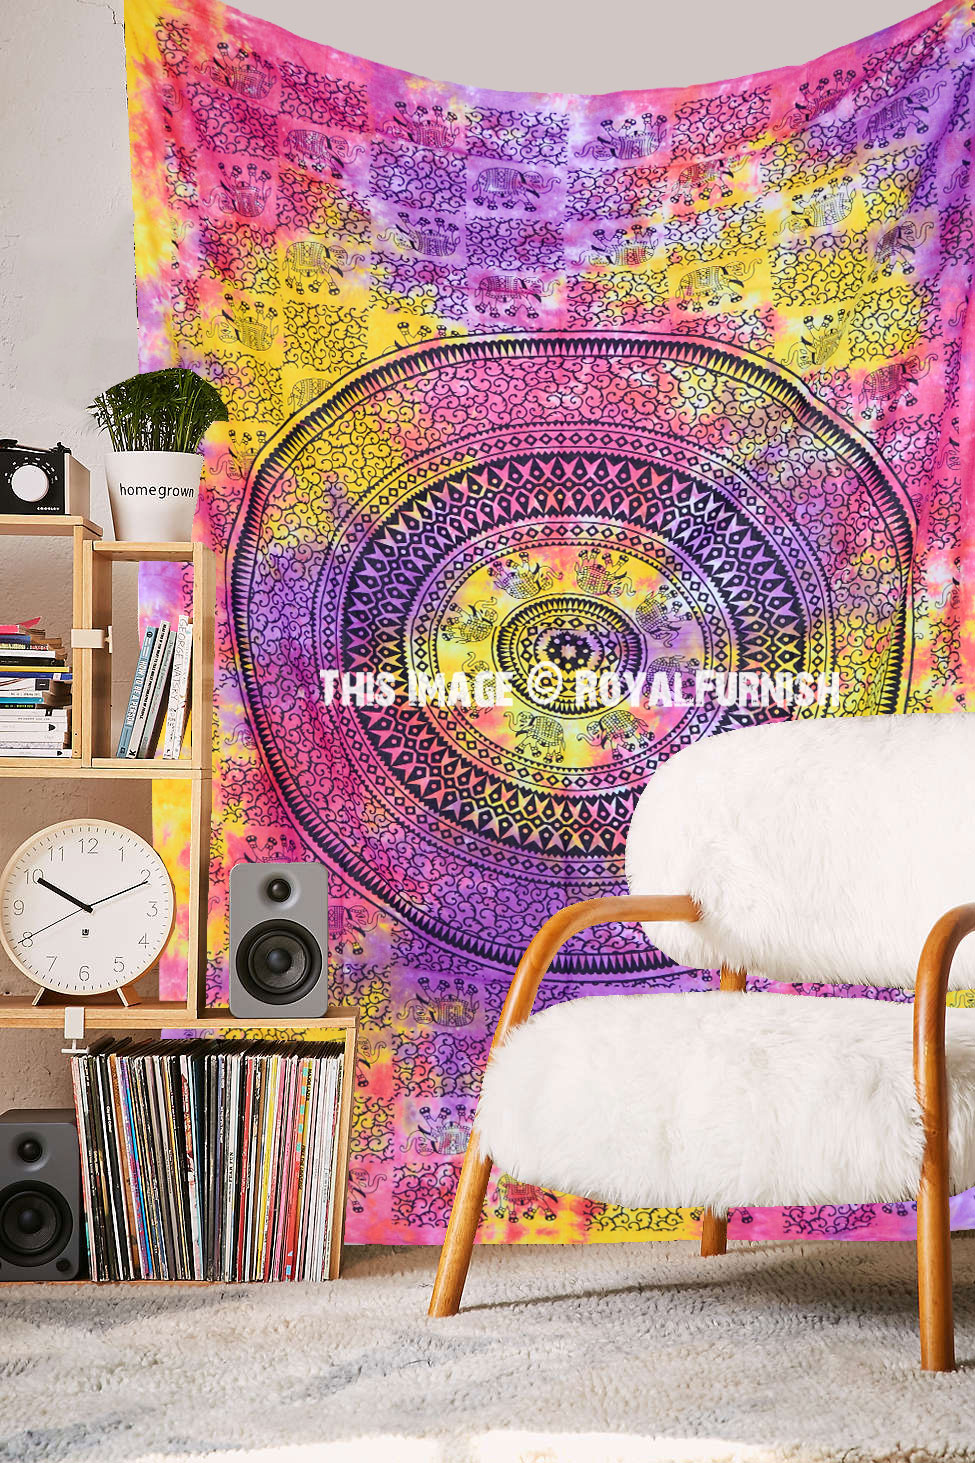 Small Pink & Purple Floral Ombre Mandala Wall Tapestry, Hippie Tapestry  Wall Hanging